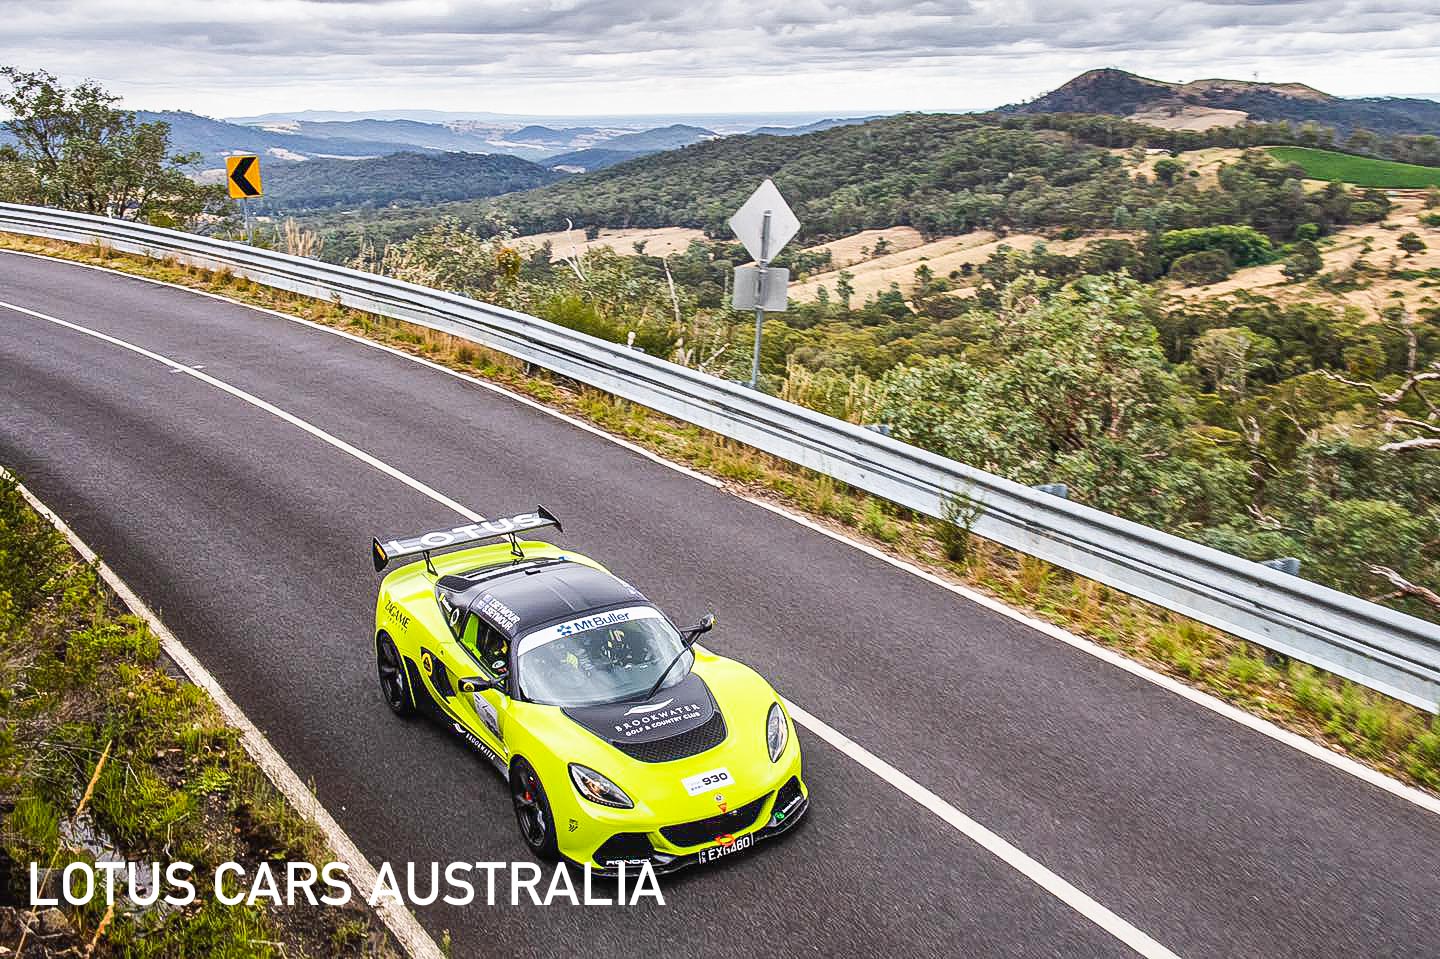 Lotus Sports Cars At Targa High Country Tarmac Rally February 2021 Tony Seymour Driving Gren Exige On Stage